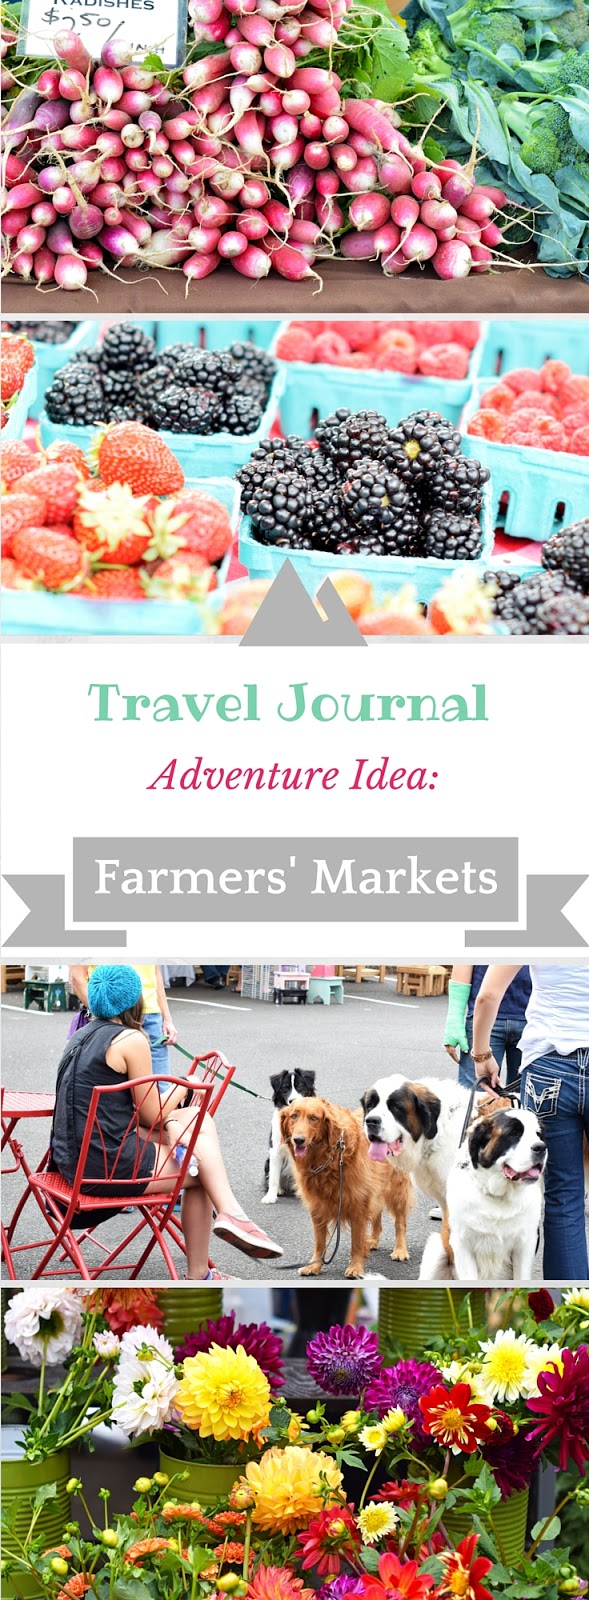 Travel Journal ideas: Local Farmers' Markets. The Salem Oregon weather lends itself to one of the best farmers' markets. Enjoy local produce, flowers and entertainment. Great family activity whether traveling or as a resident. 